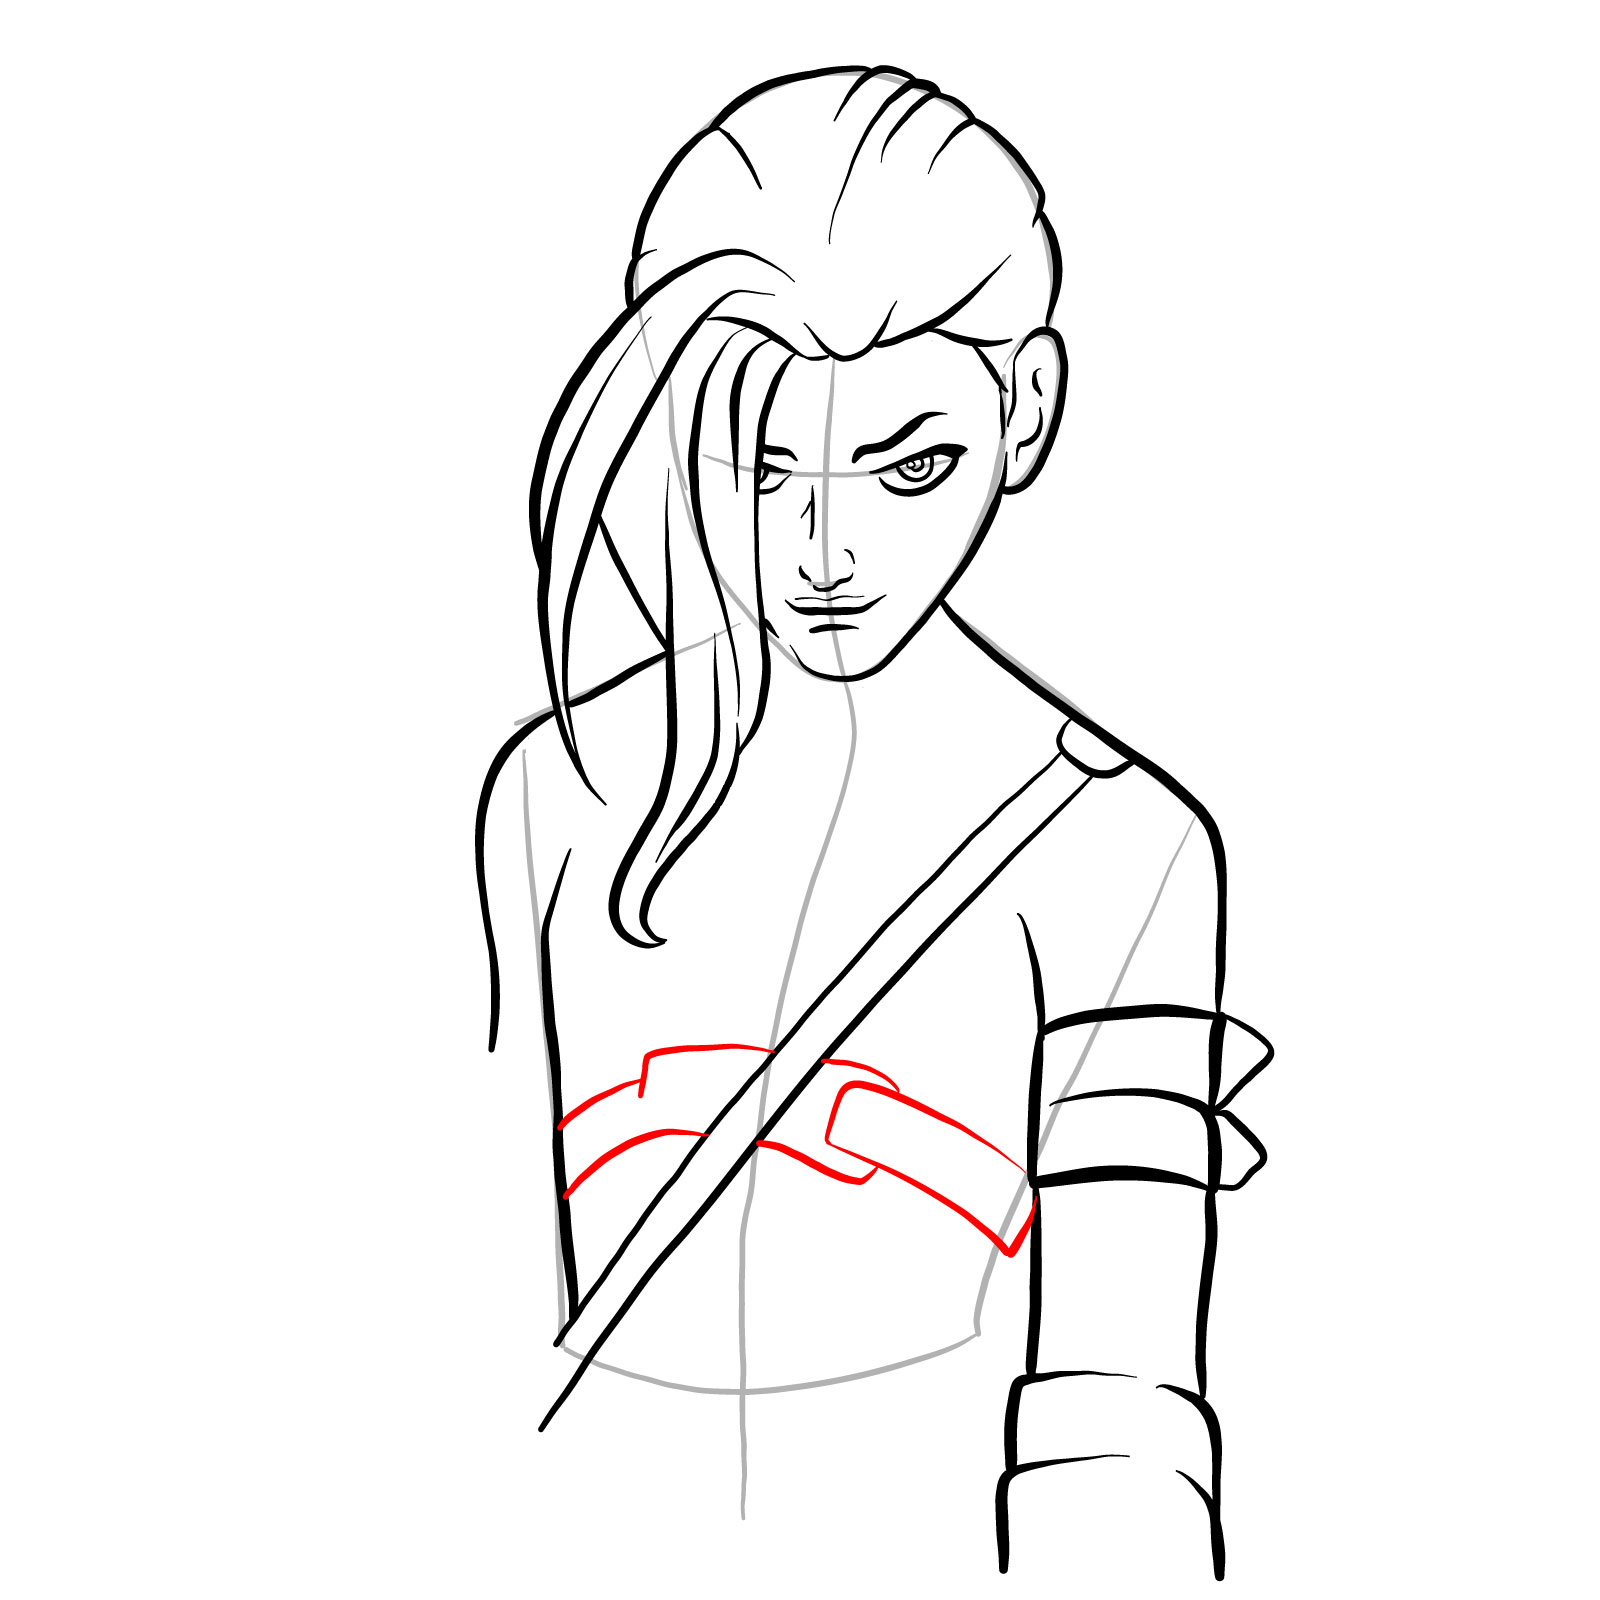 How to draw grown-up Jinx - step 20